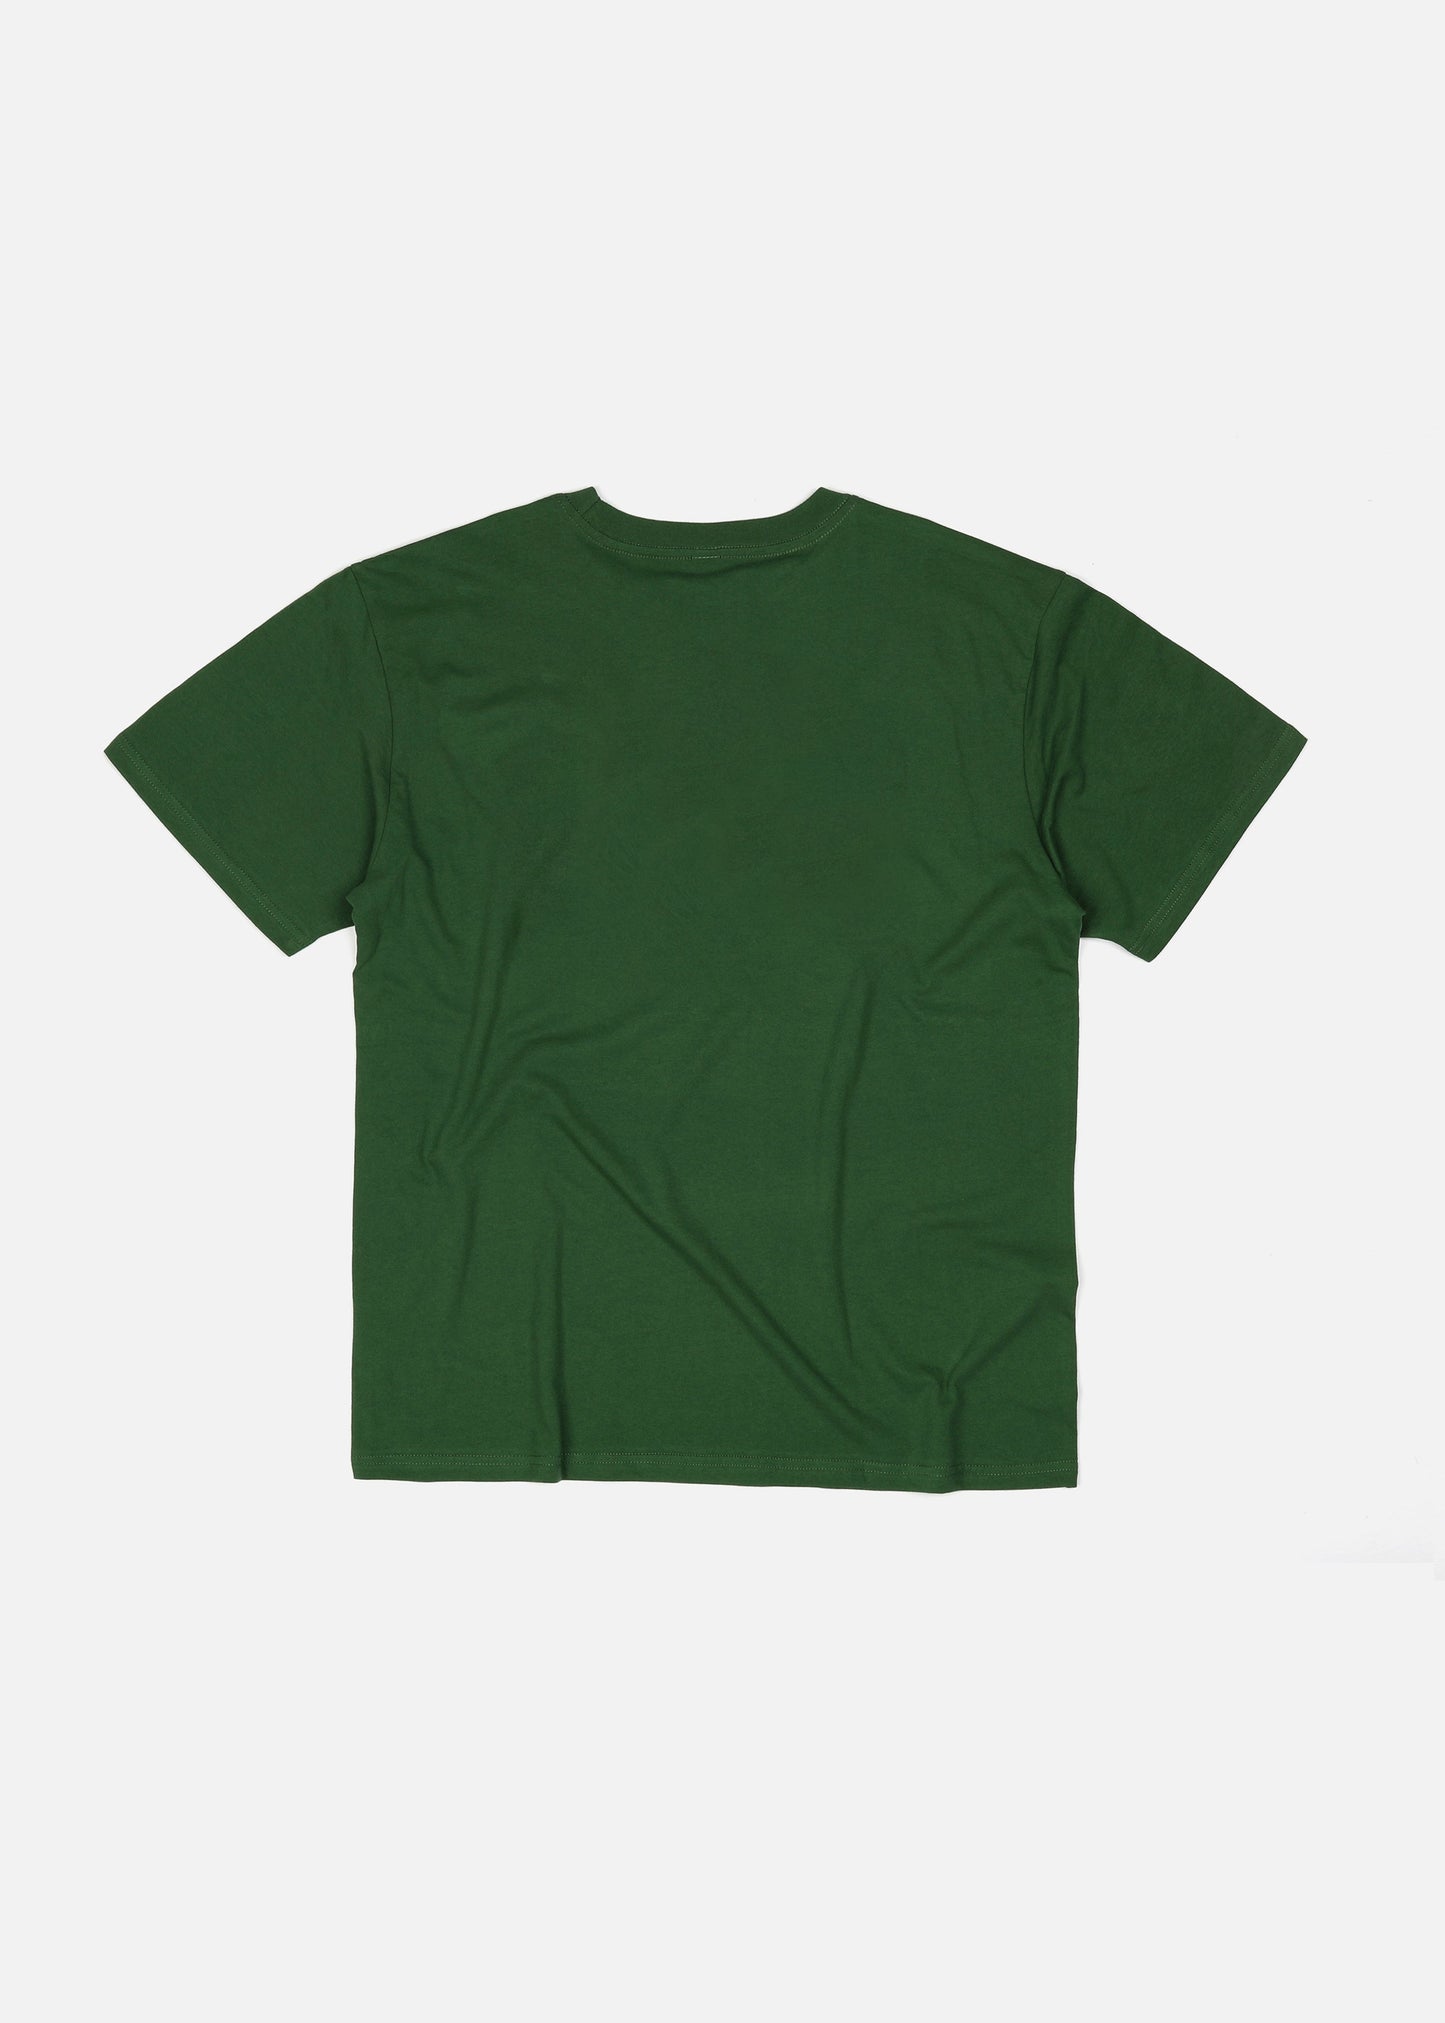 PROJECTING T-SHIRT : FOREST